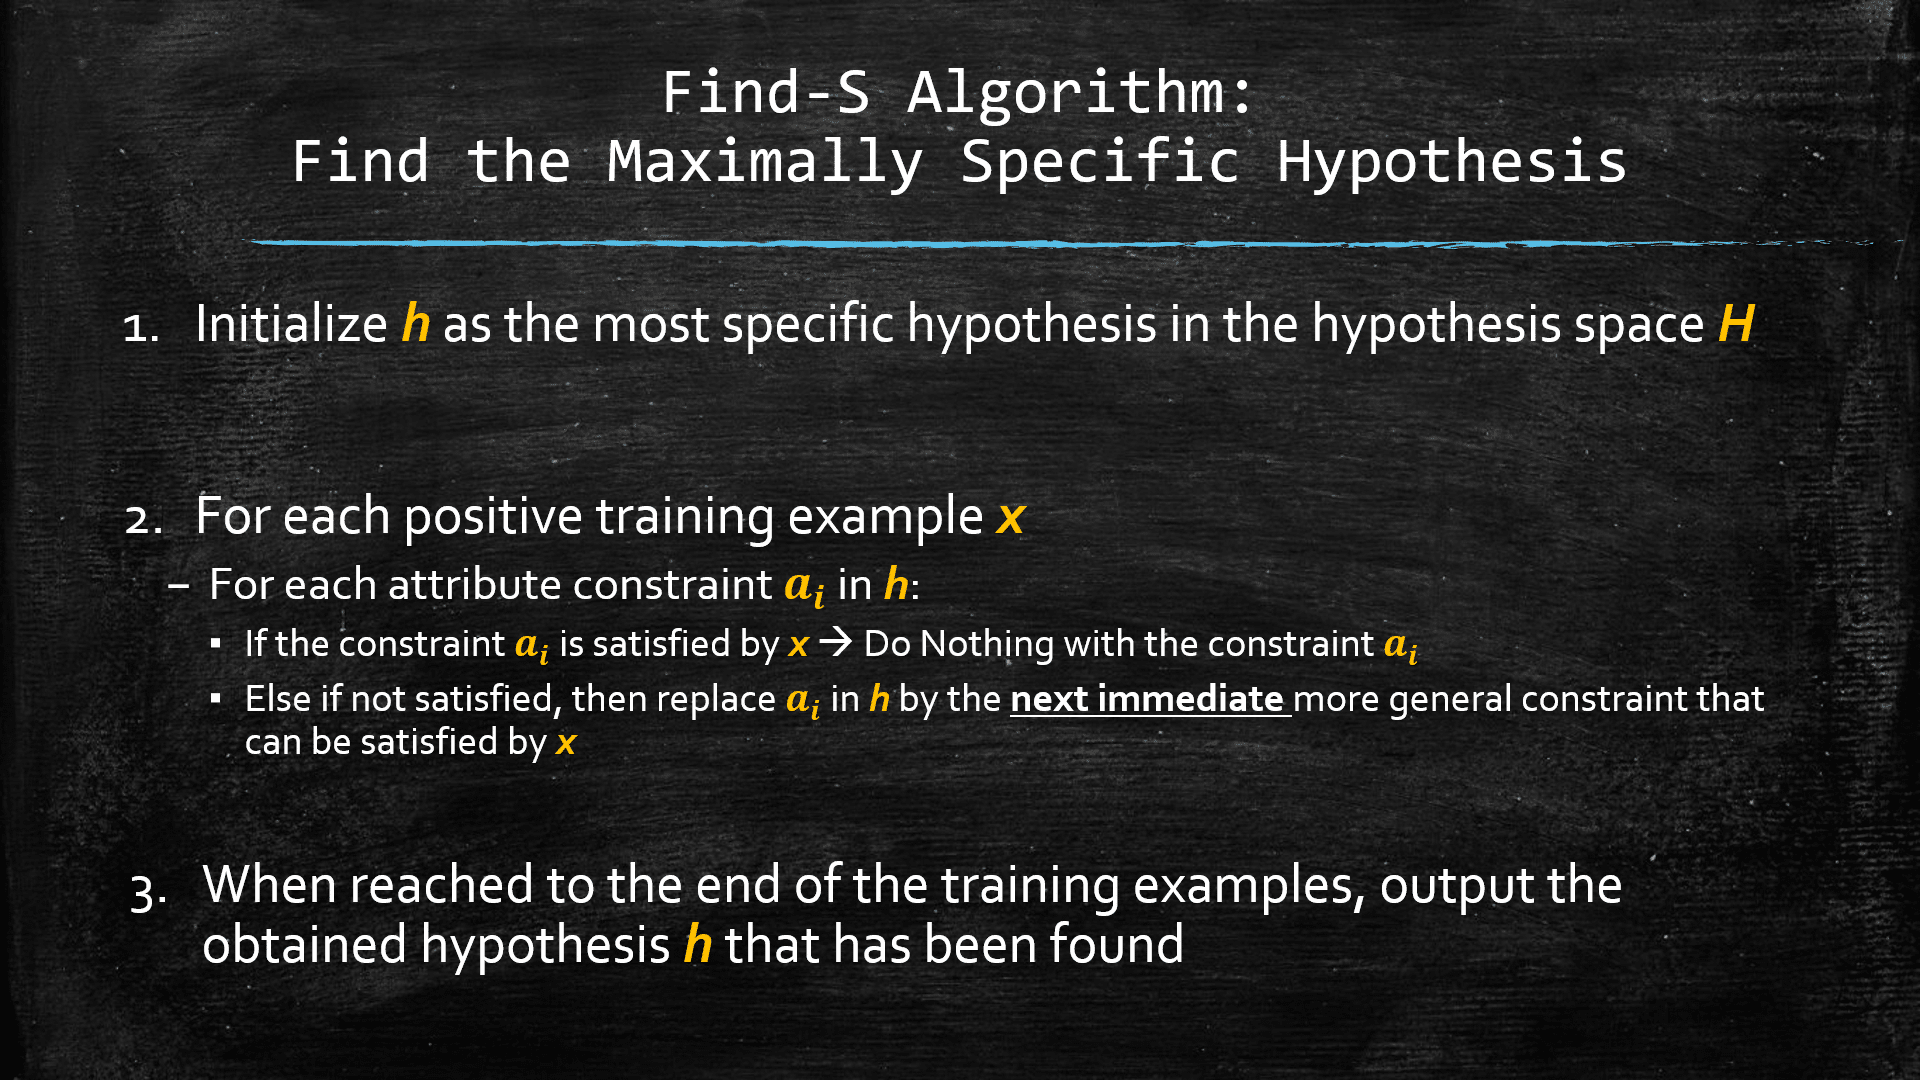 general to specific ordering of hypothesis in machine learning